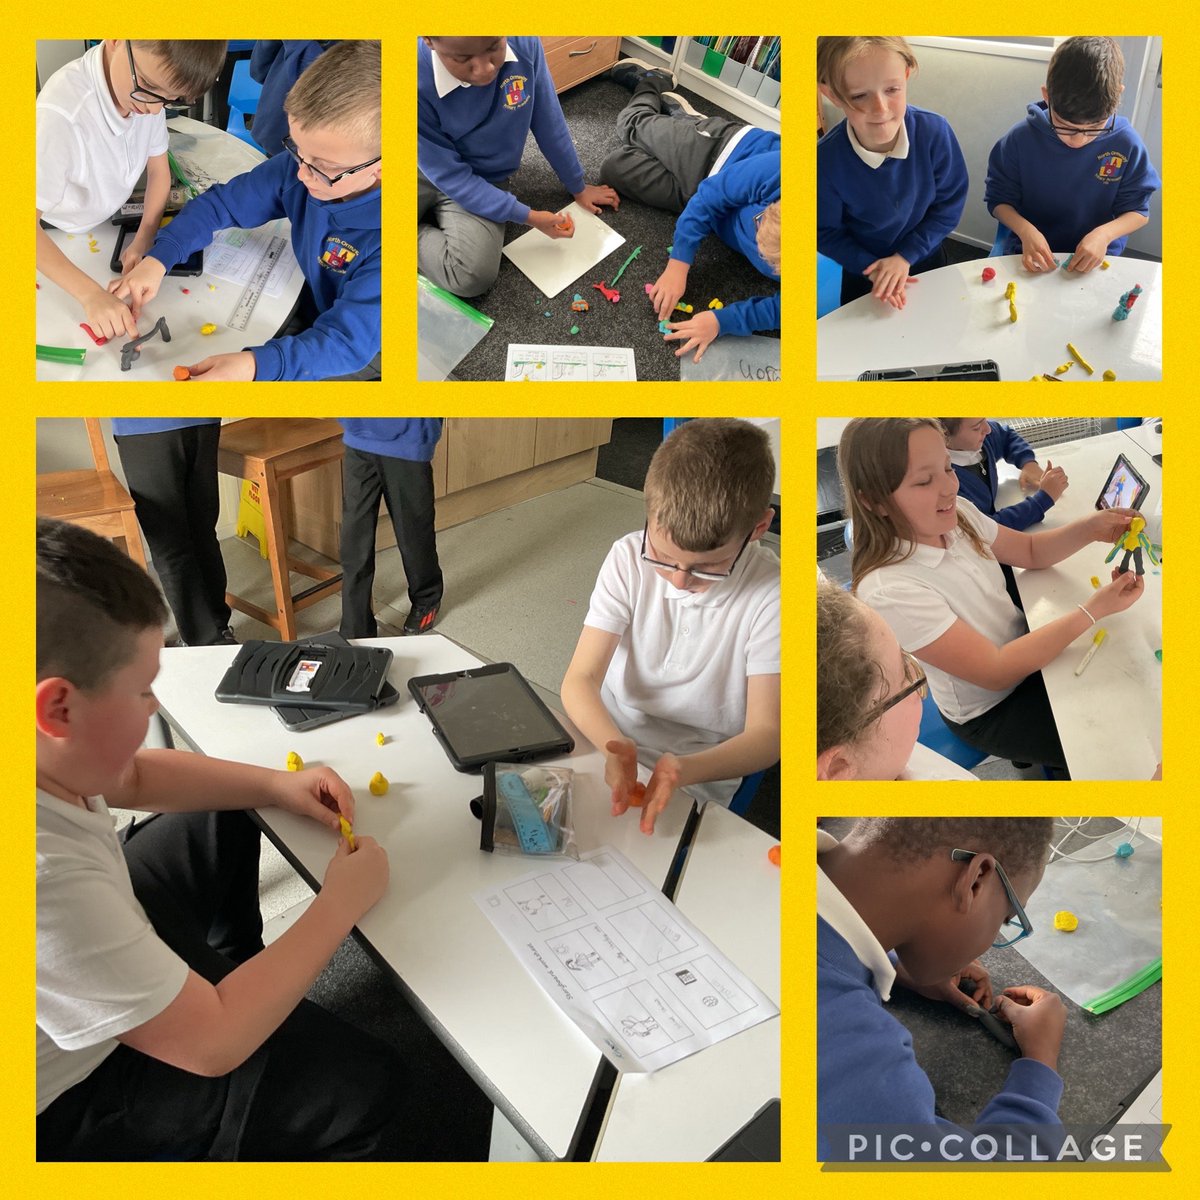 Year 5 have been busy in computing, modelling with plasticine, to create their characters and objects for stop motion animation. @CNicholson_Edu